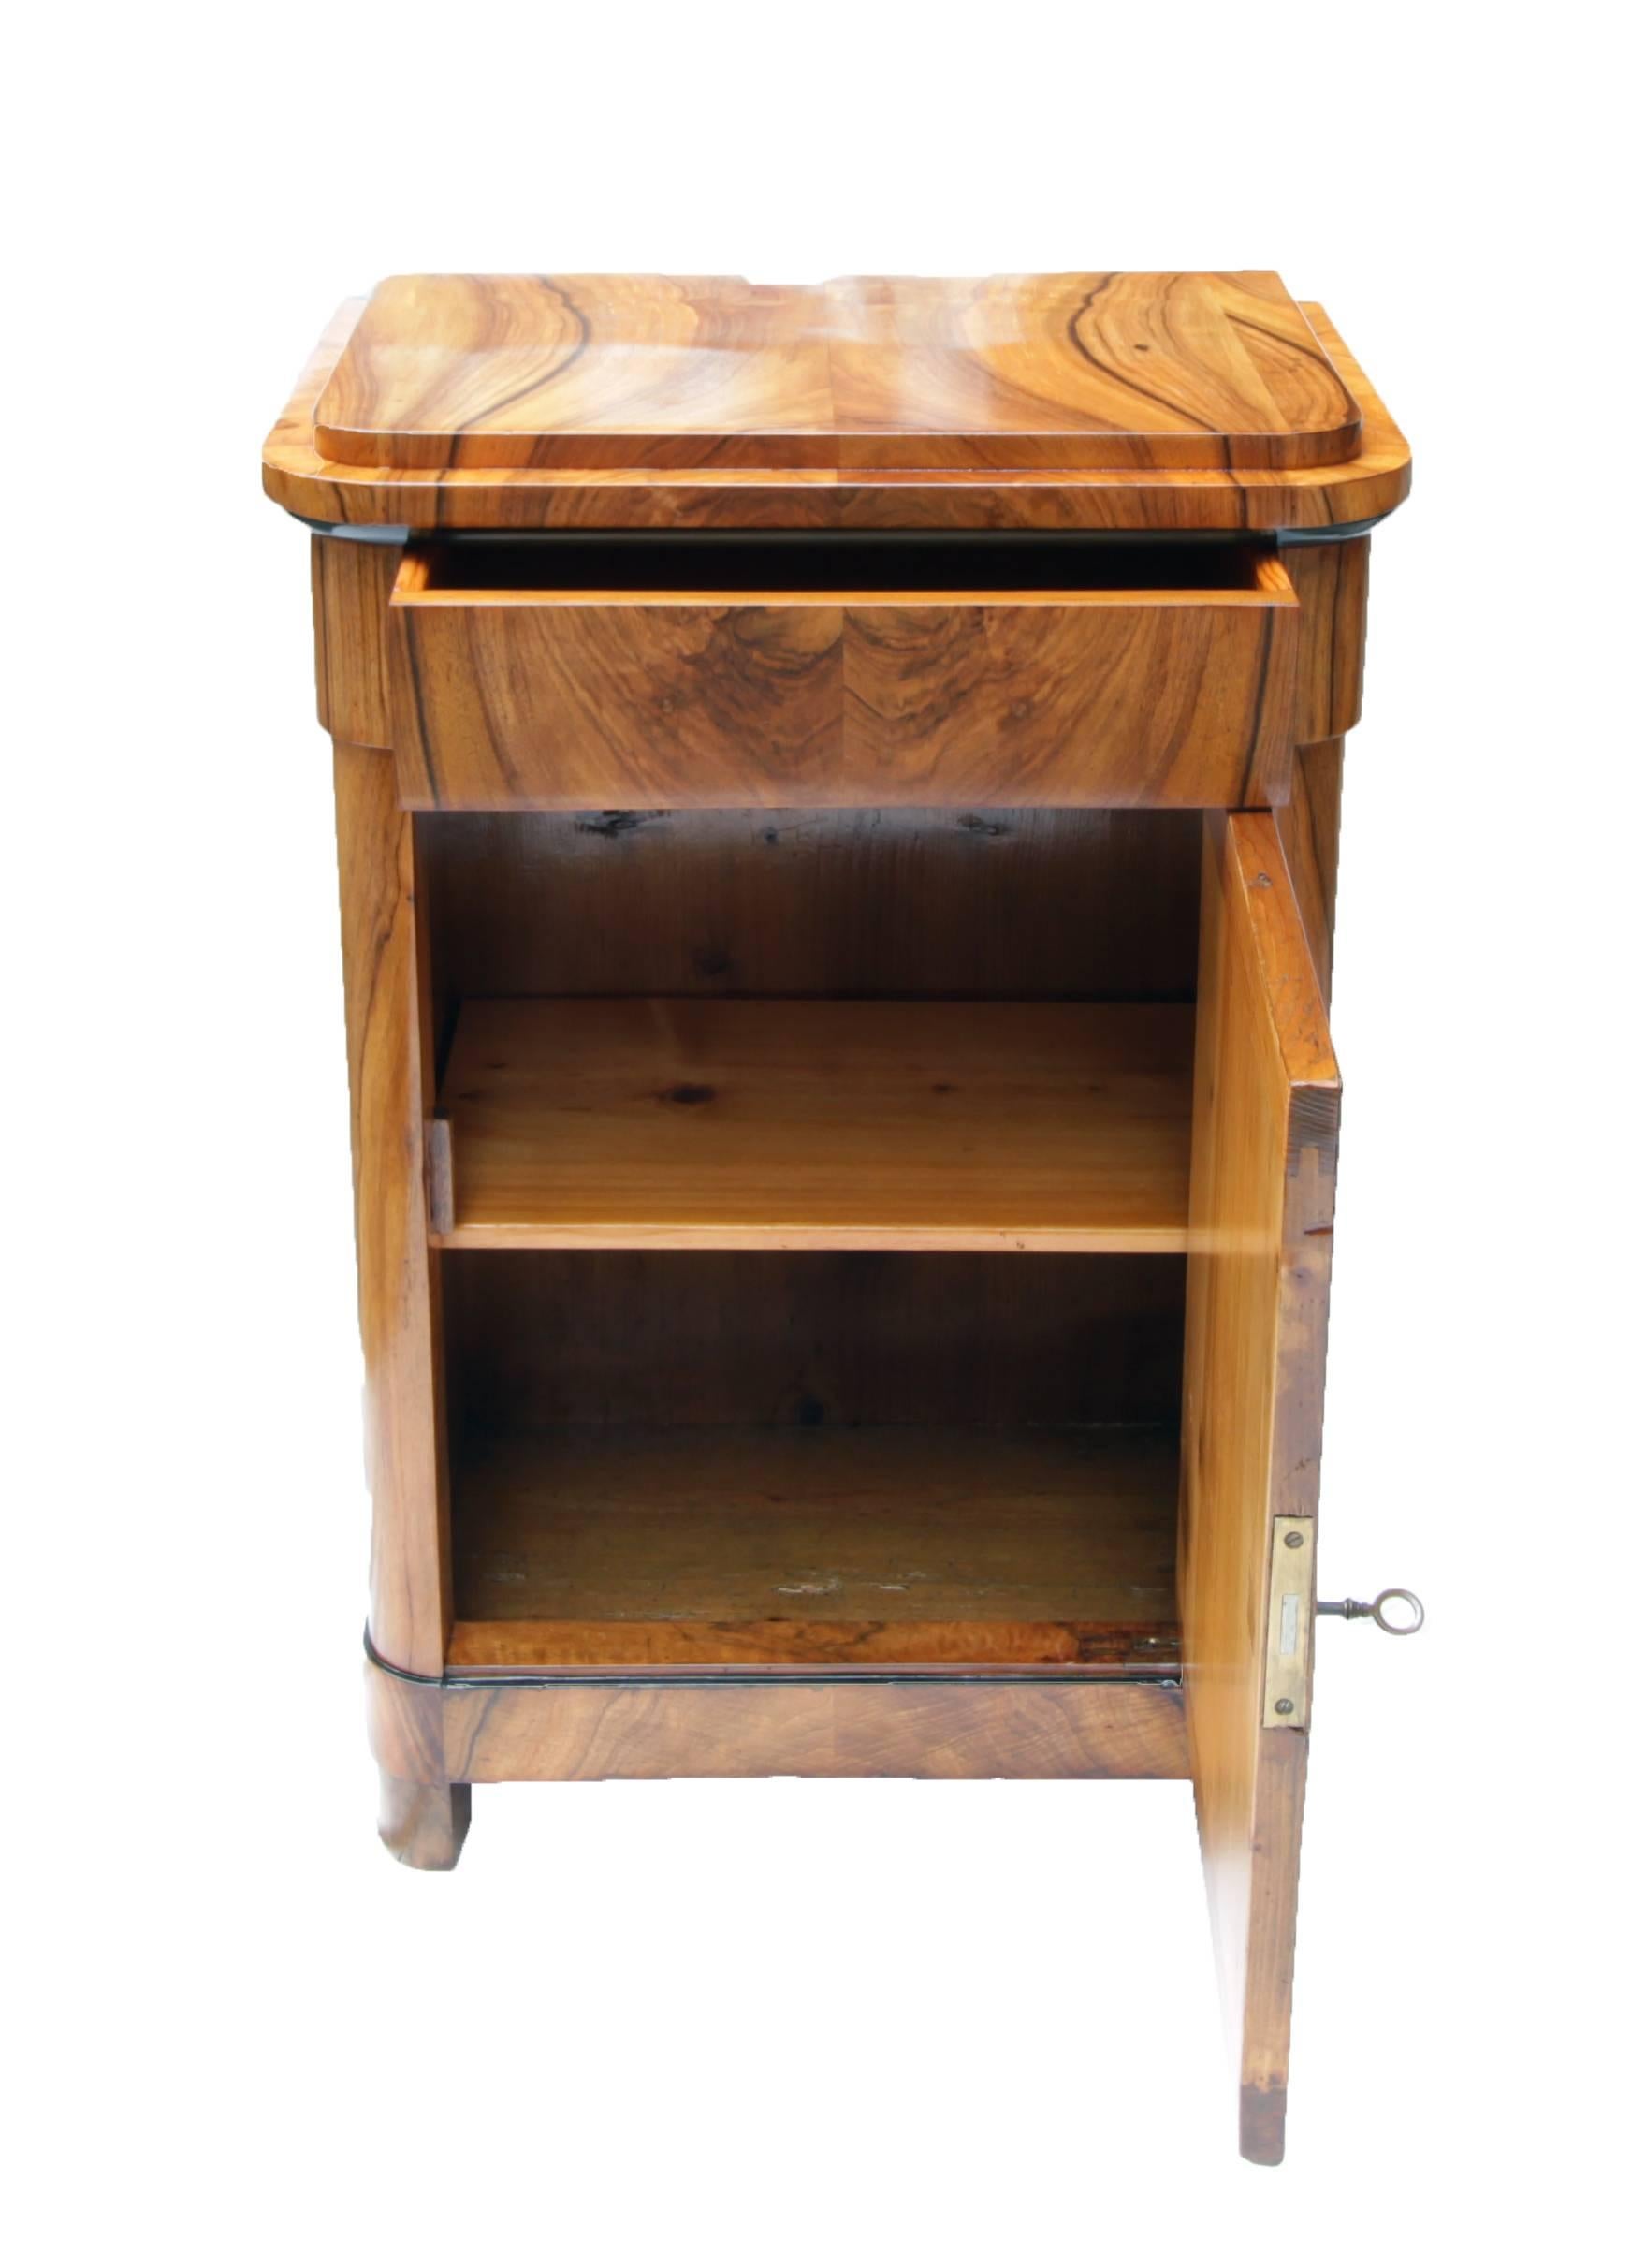 Very beautiful Biedermeier pillar cupboard consisting of a pinewood body covered with walnut veneer. Rare narrow measurement. In very well restored condition.